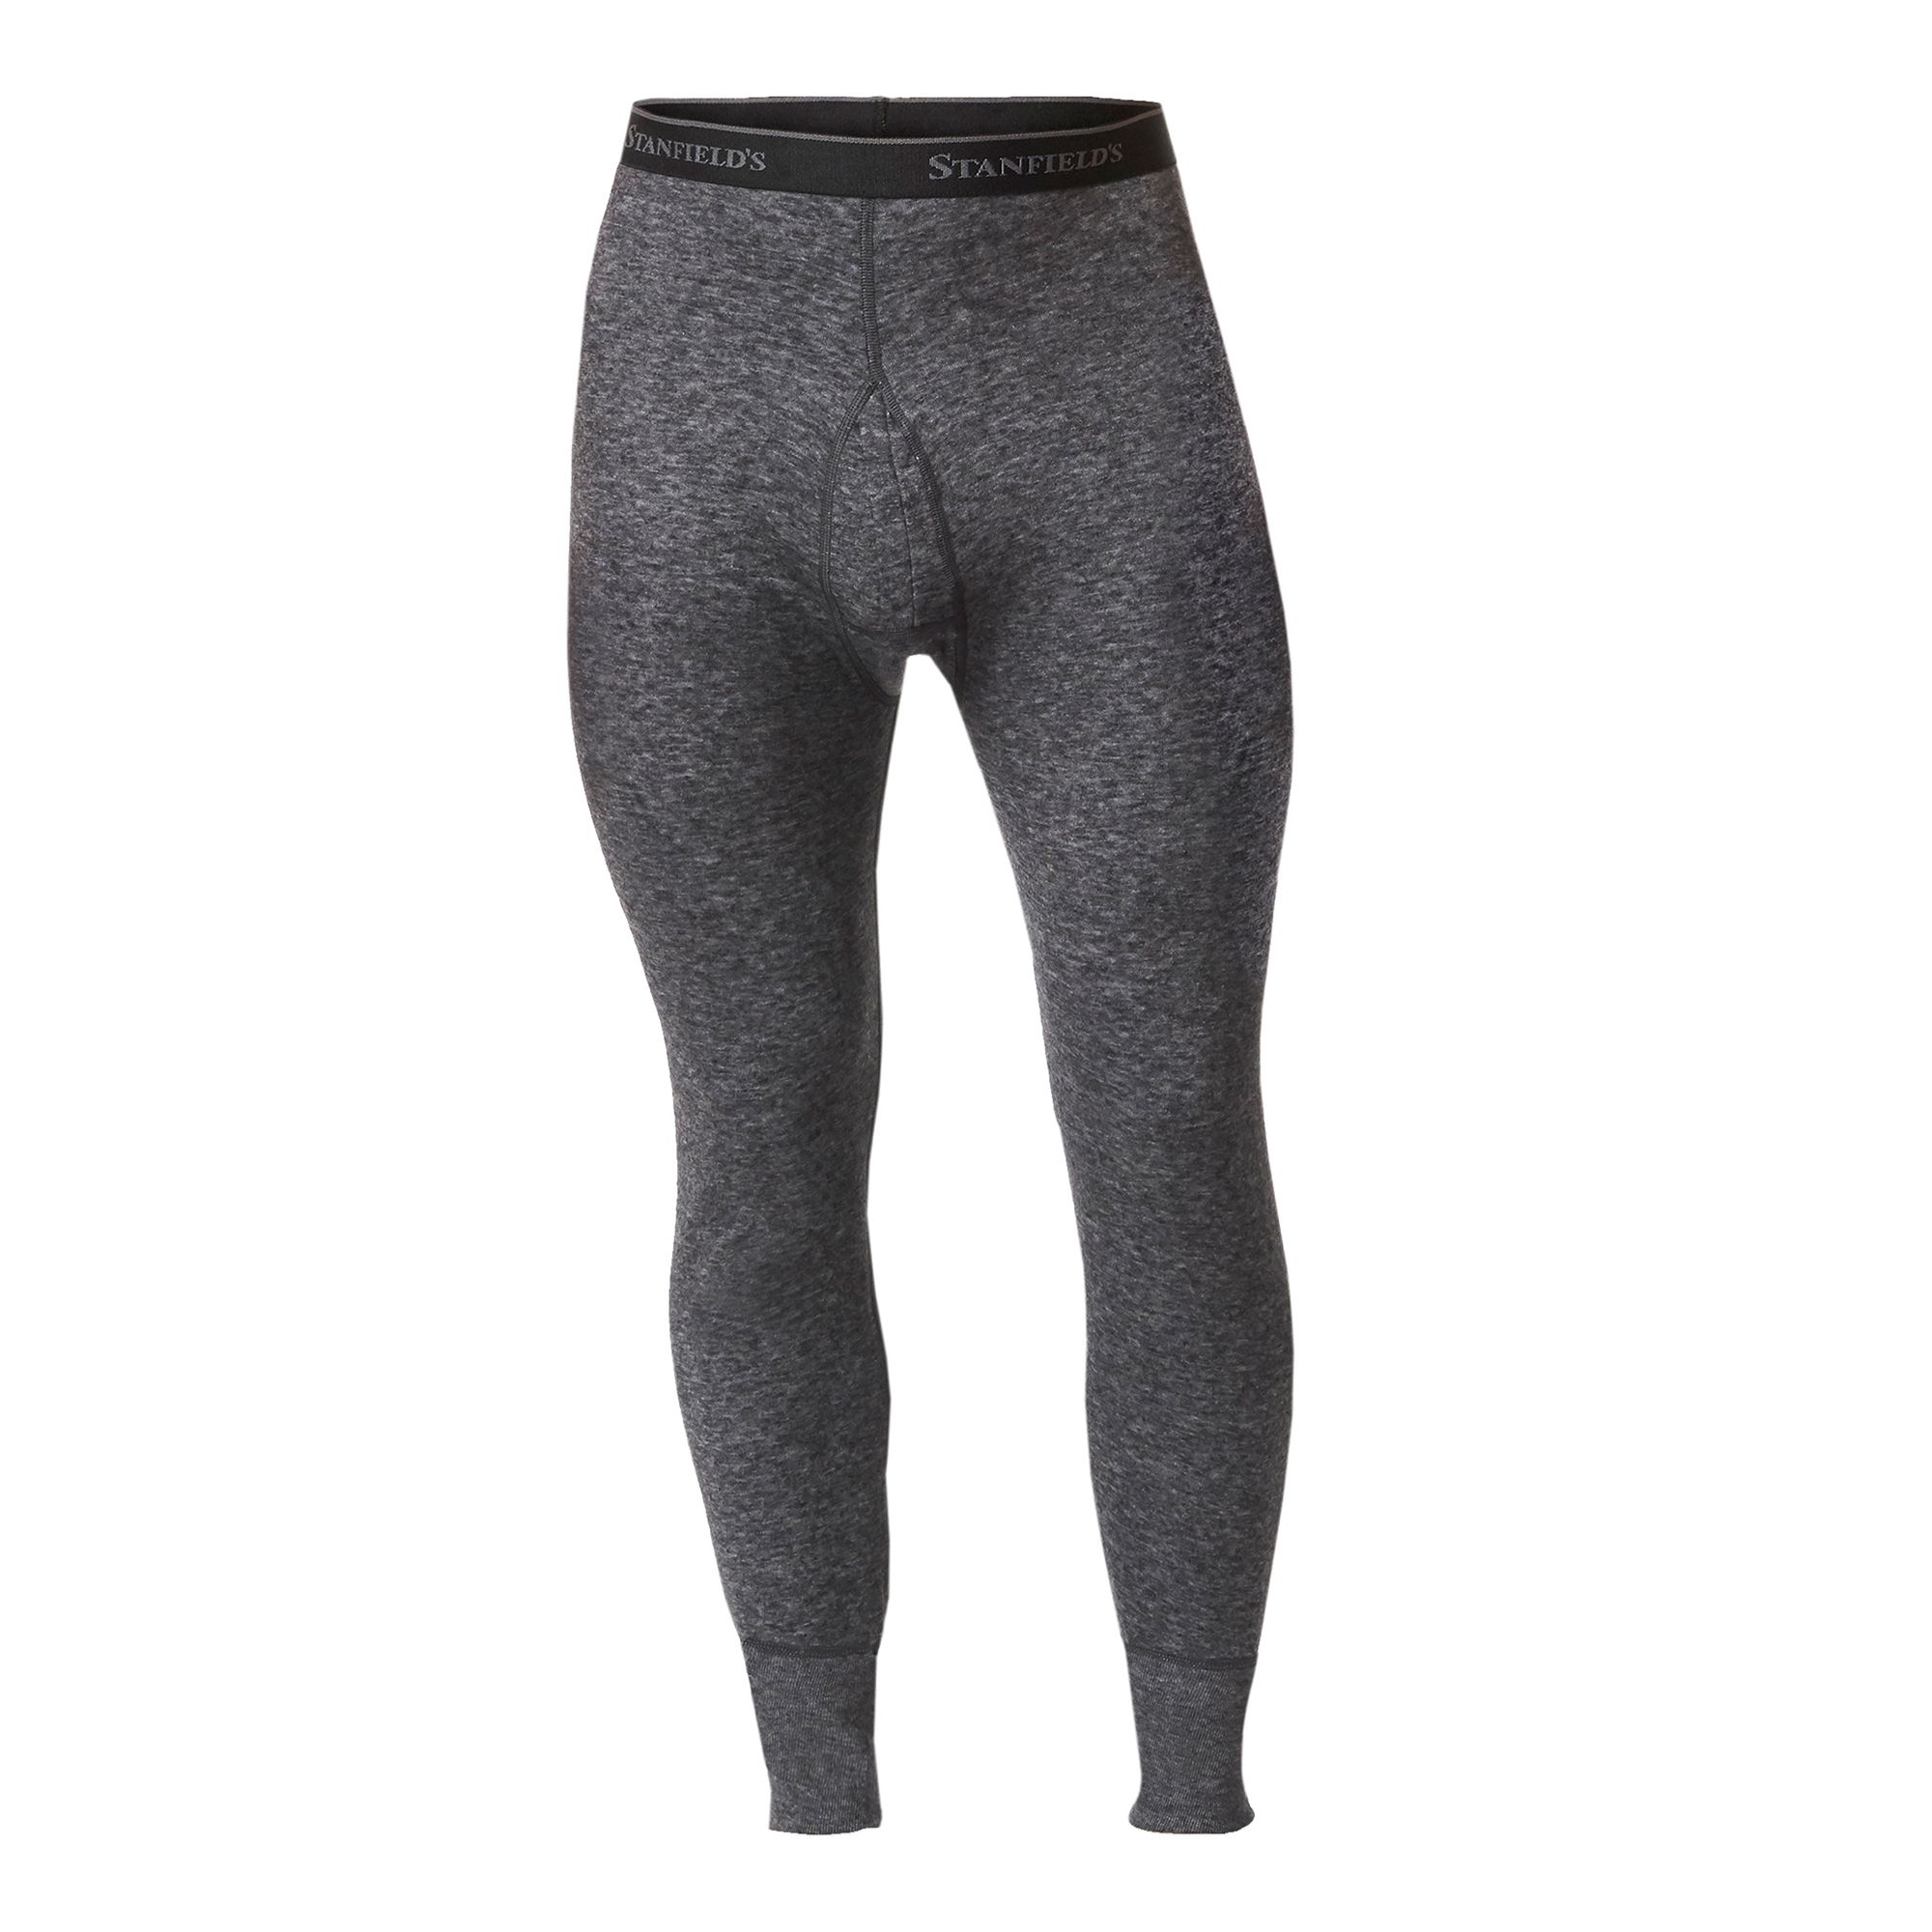 Stanfield's, Men's 2 Layer Wool Blend Long Johns, Size XL, Color CHARCOAL MIX, Model 8812-Charcoal Mix-XL